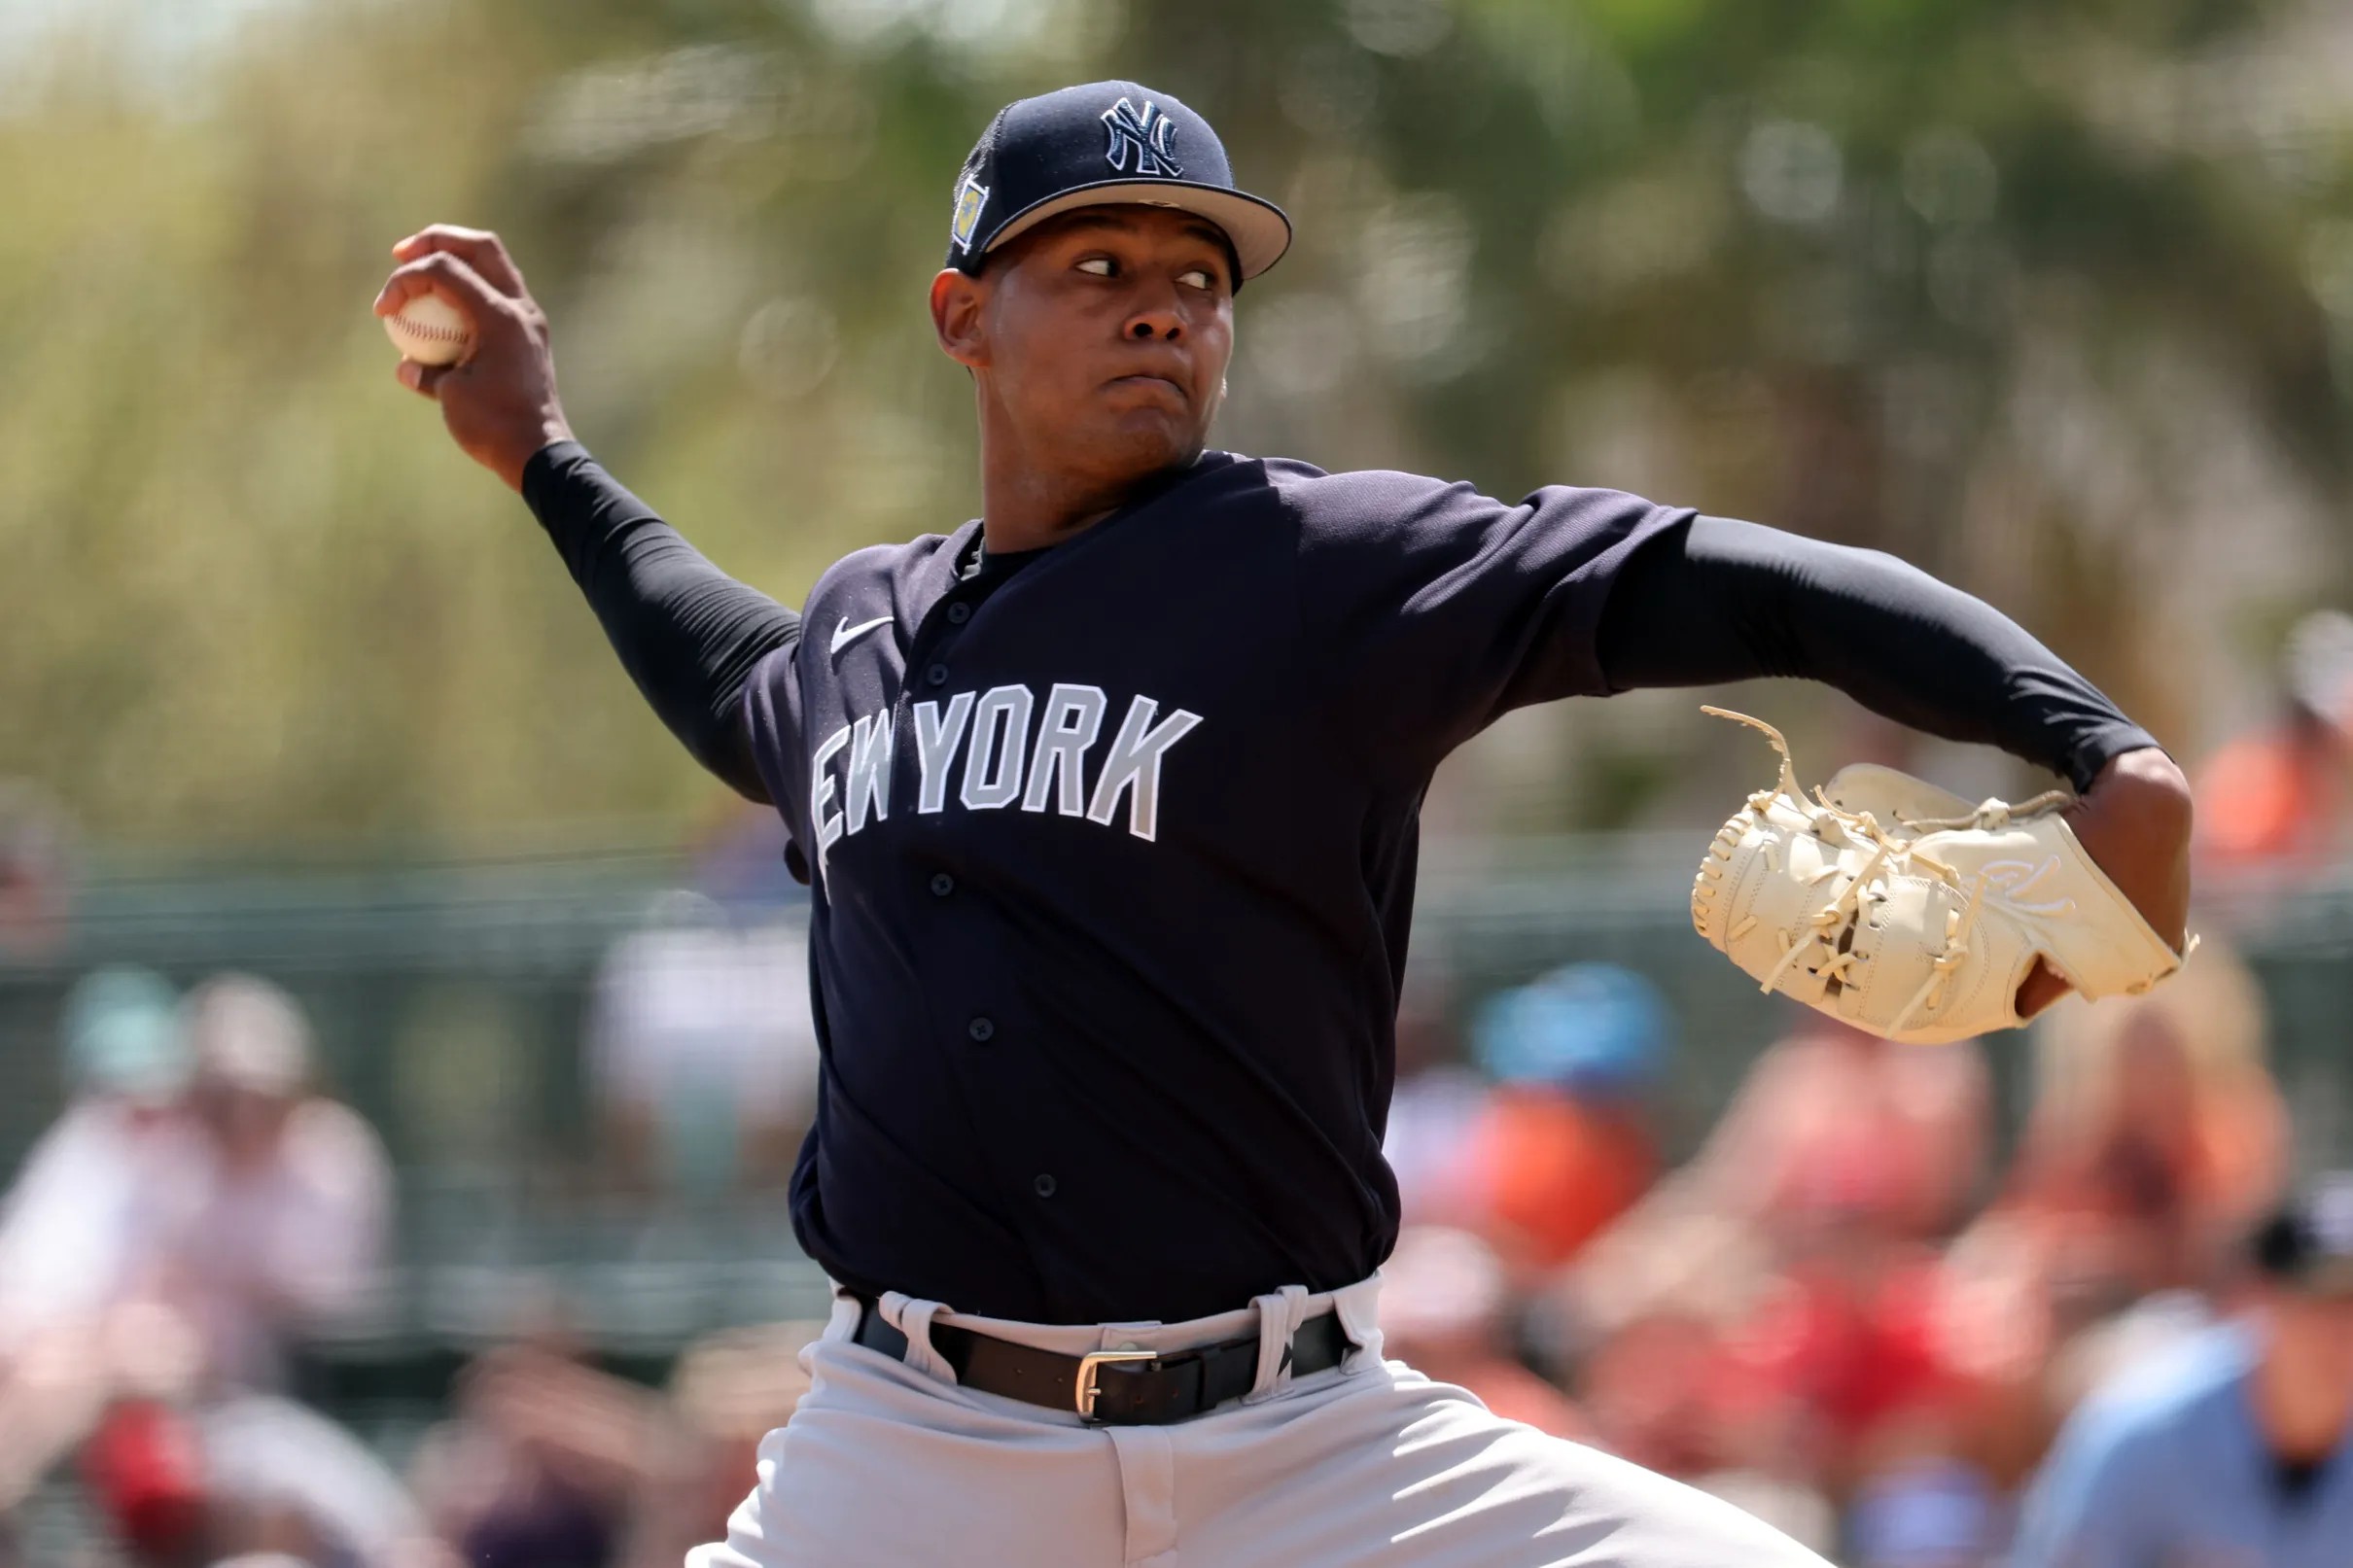 The Yankees’ Top 10 Prospects No. 10 Jhony Brito